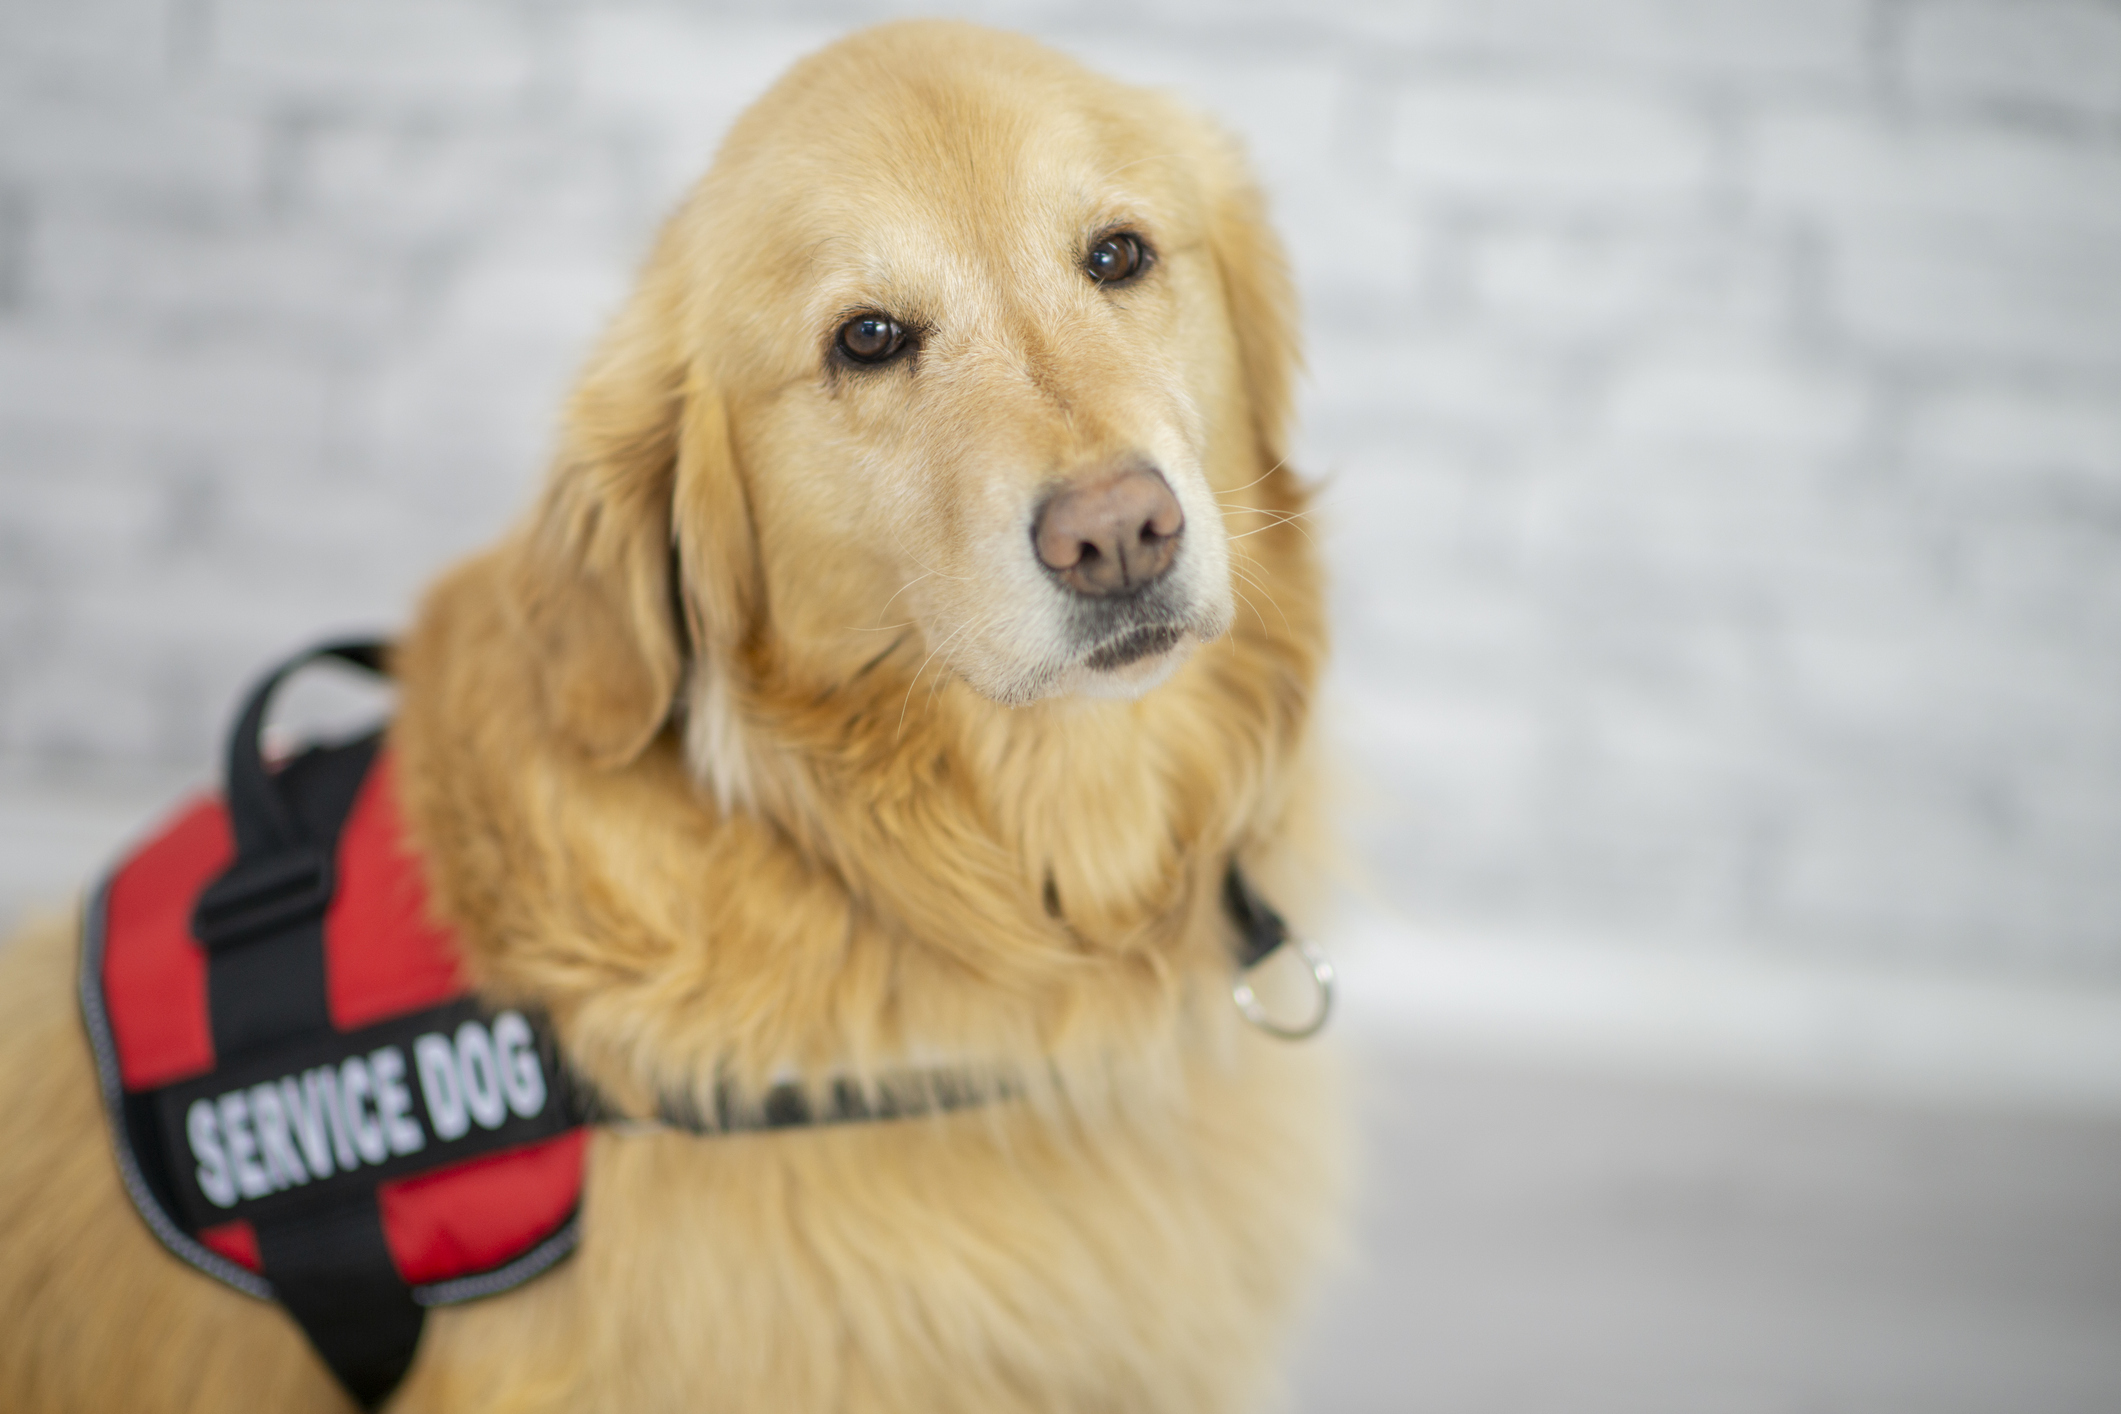 A service dog sitting and wearing a "service dog" vest